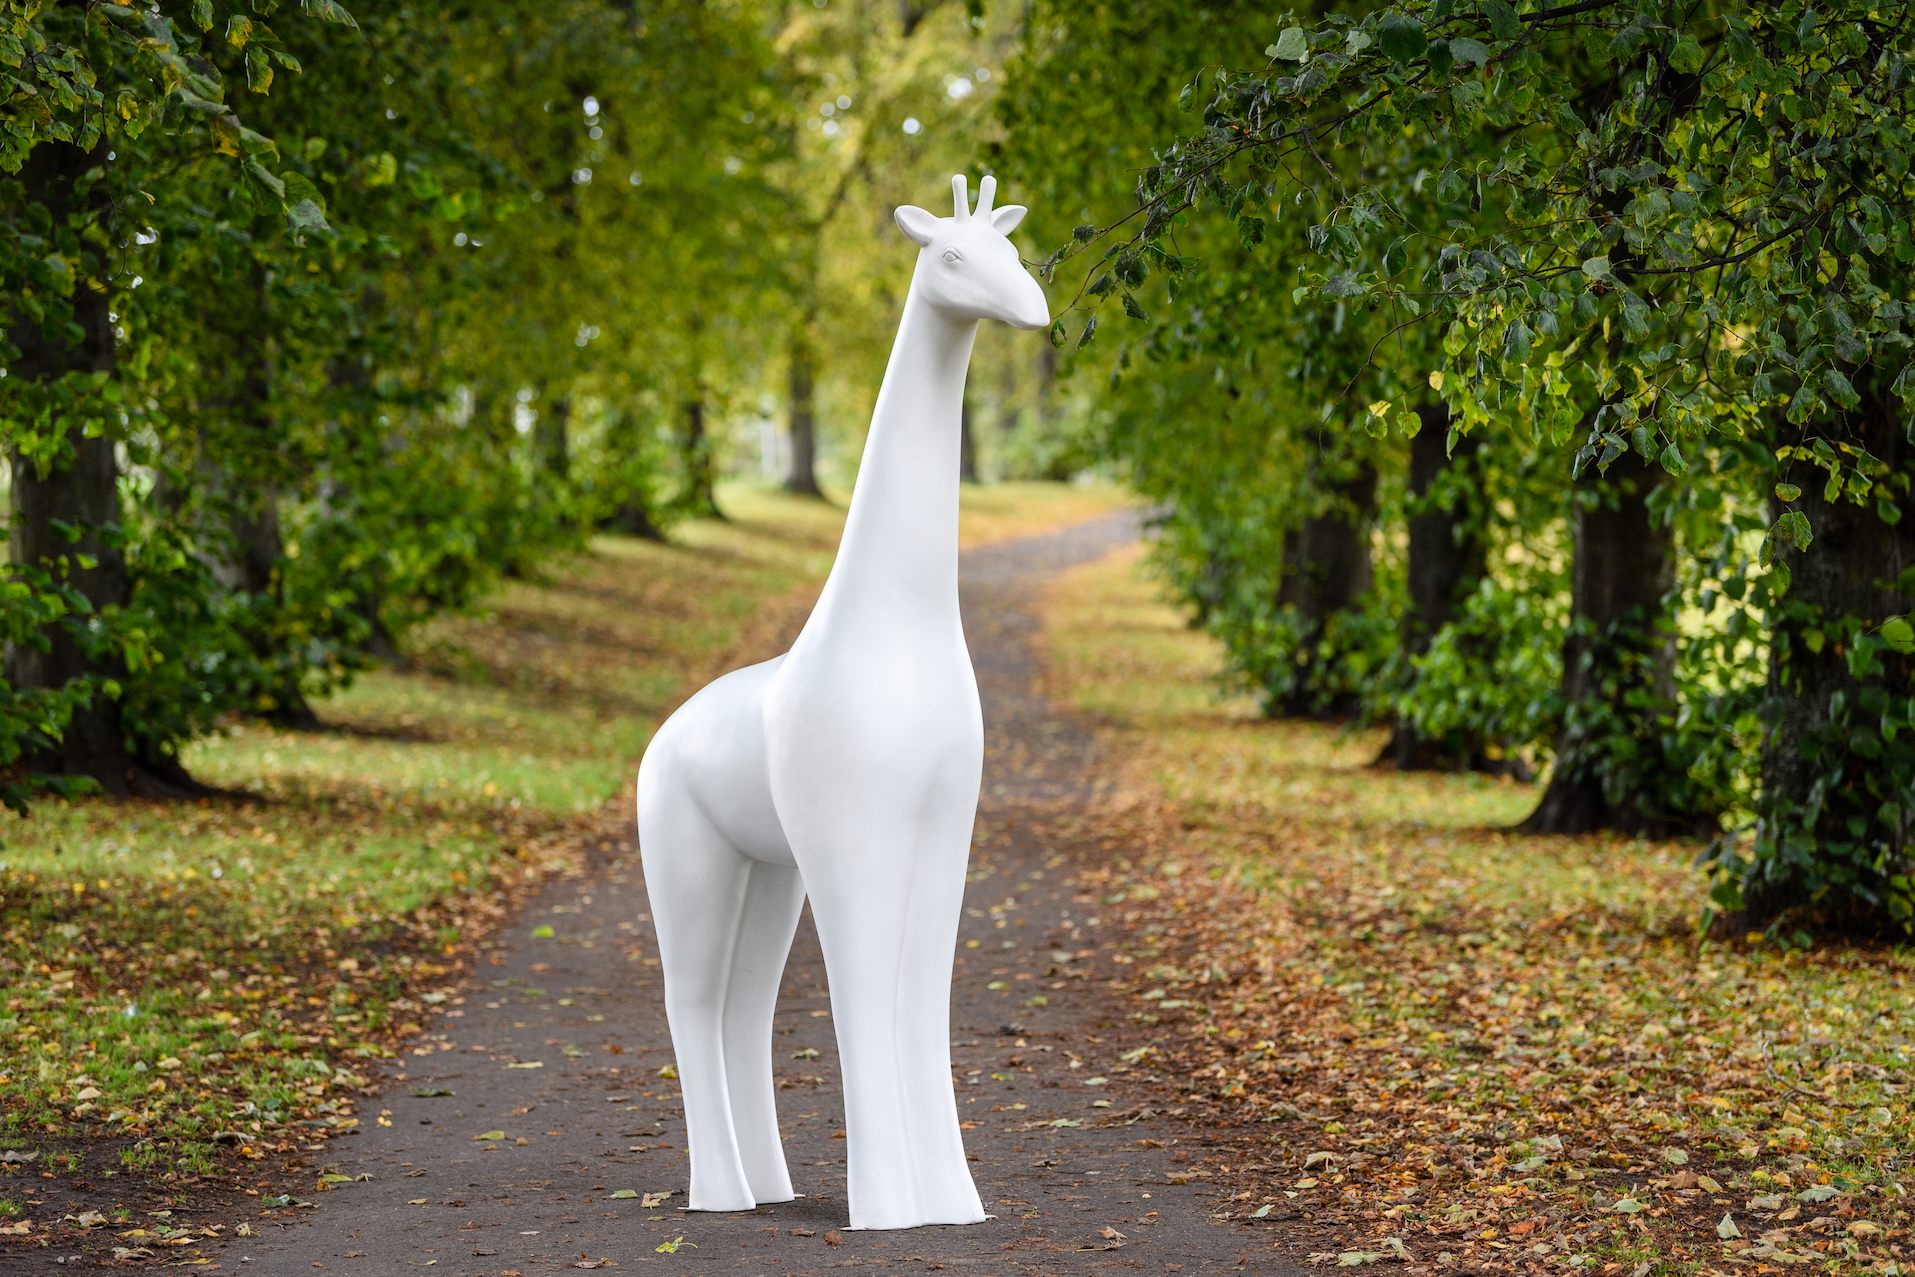 Blank giraffe about town sculpture stood on path with trees either side

Image: 2021